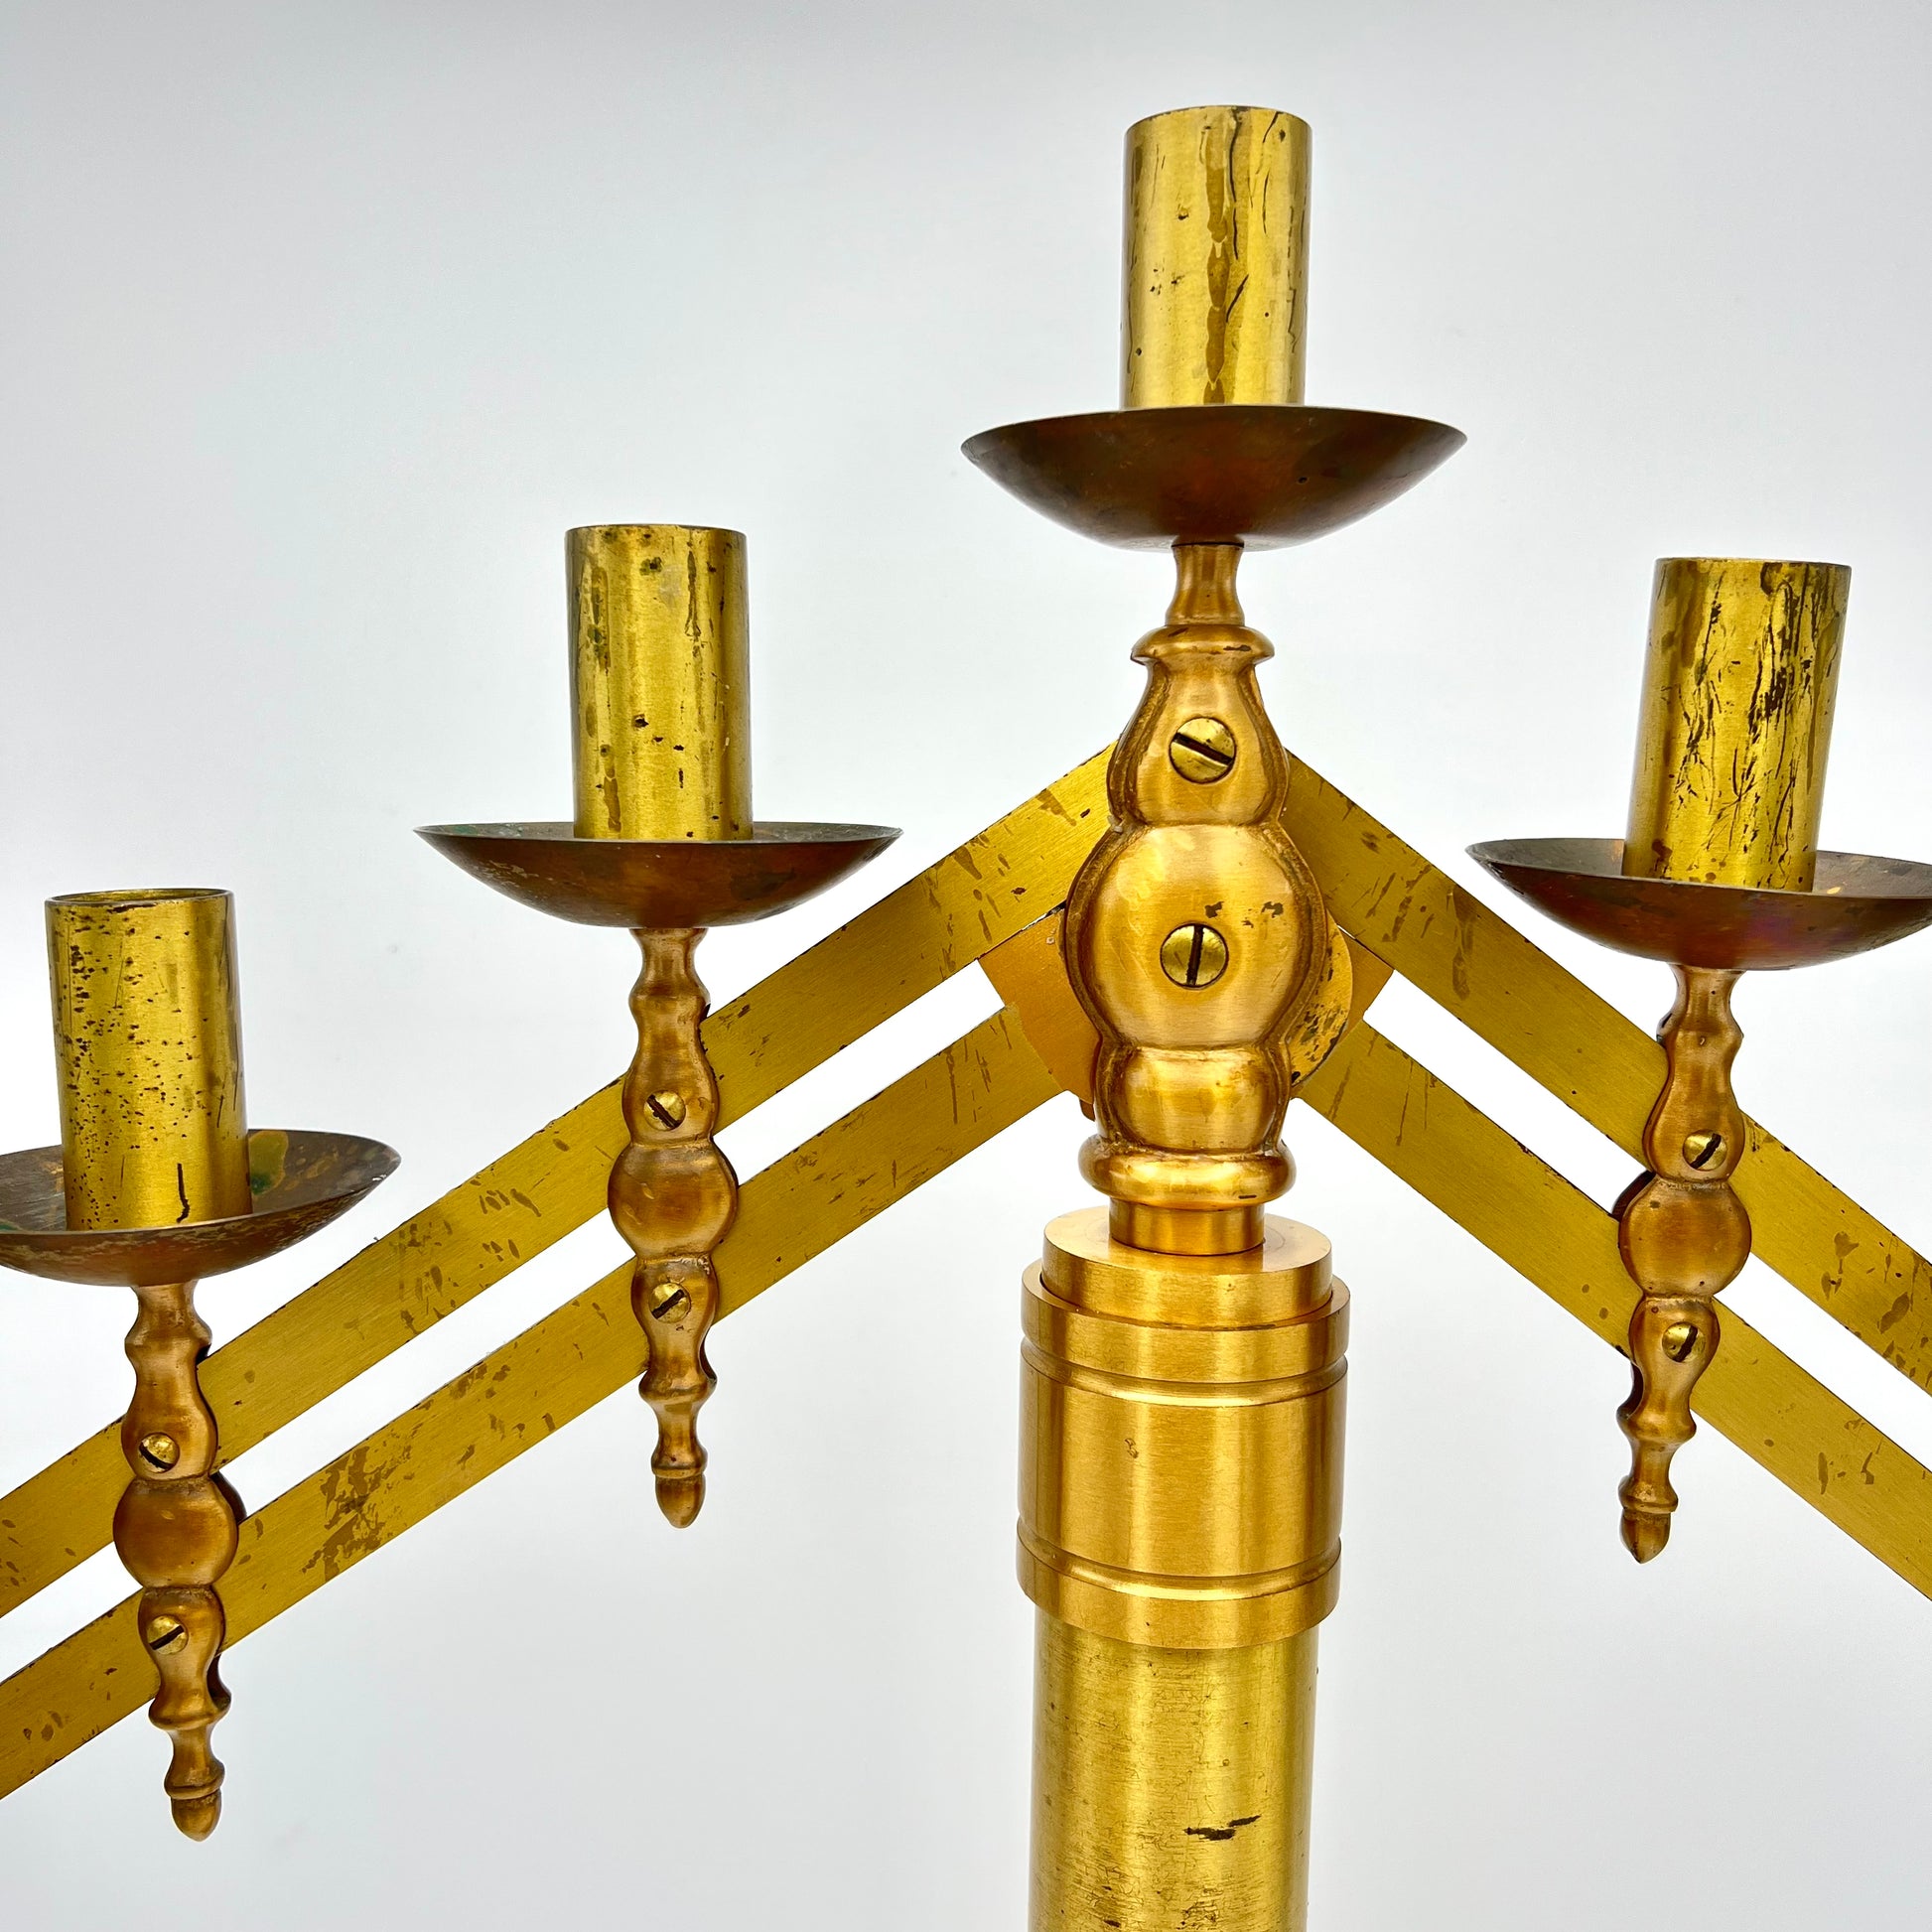 Police Auctions Canada - 7-Arm Brass Candelabra (271462H)